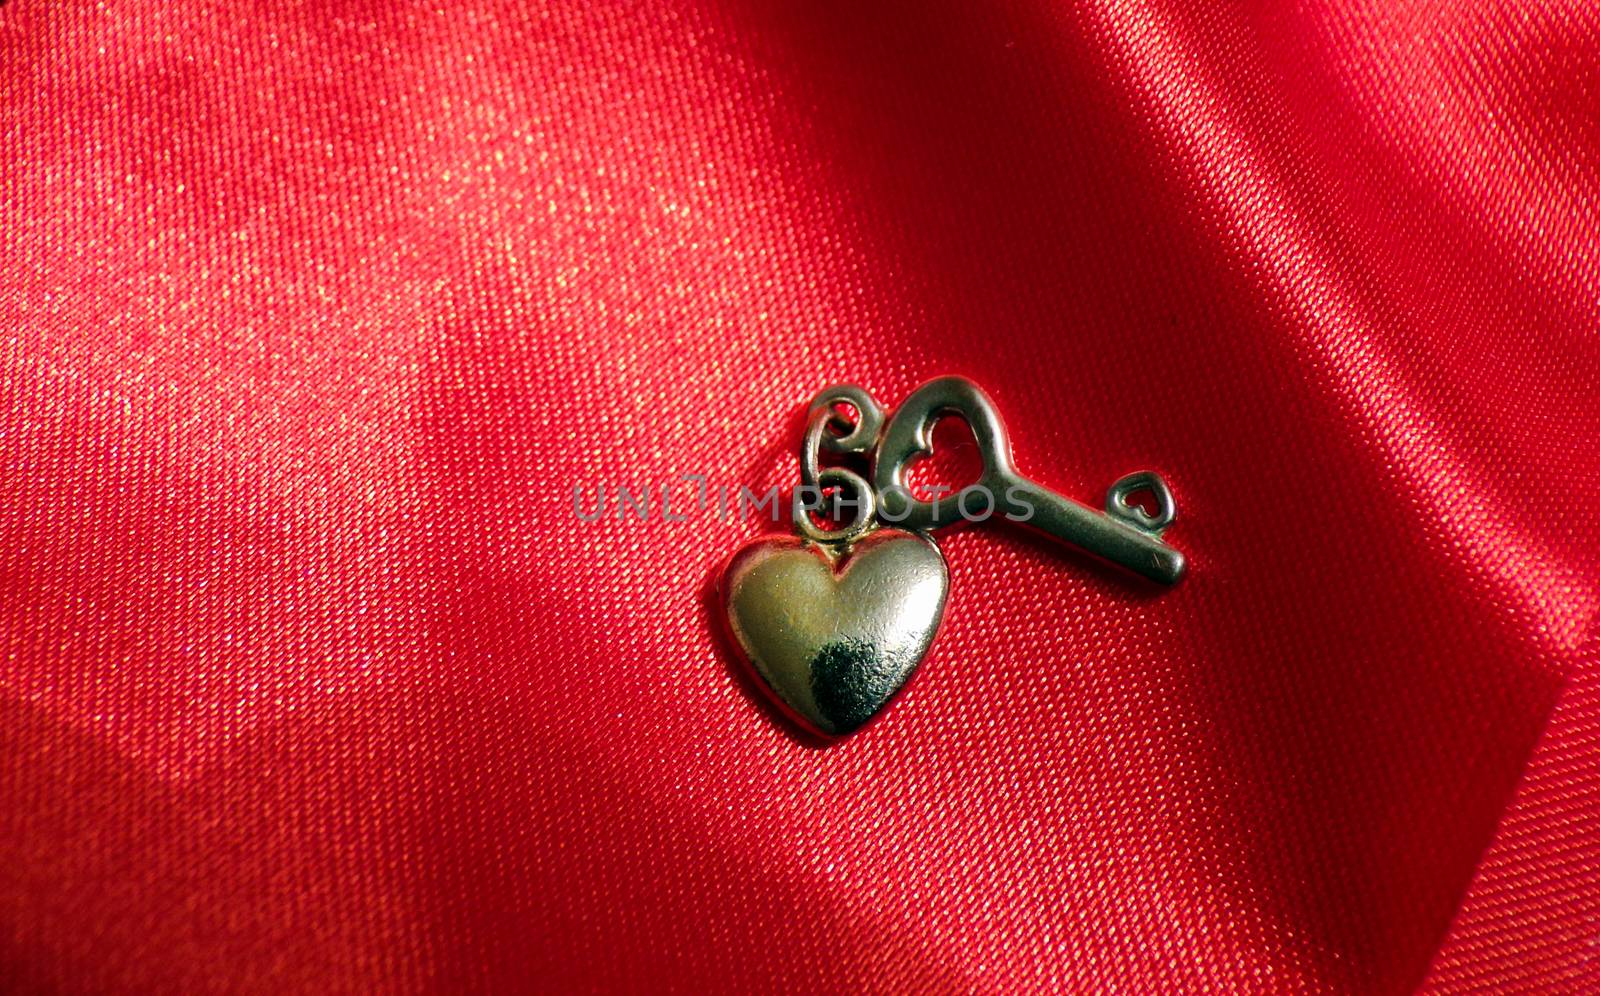 Romantic love background for Valentine's day. Heart and key made of metal on a red silk fabric.